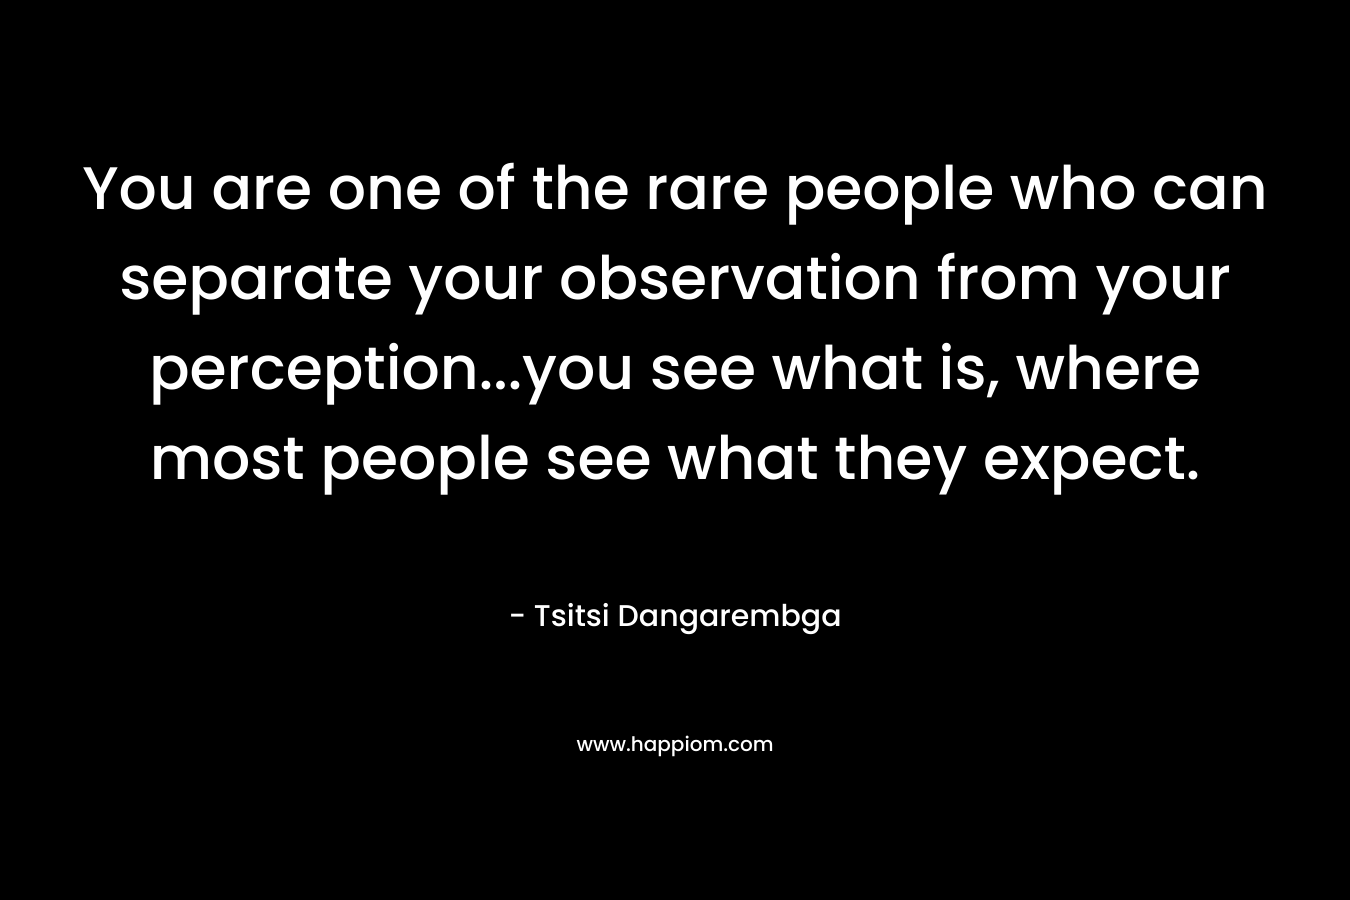 You are one of the rare people who can separate your observation from your perception…you see what is, where most people see what they expect. – Tsitsi Dangarembga